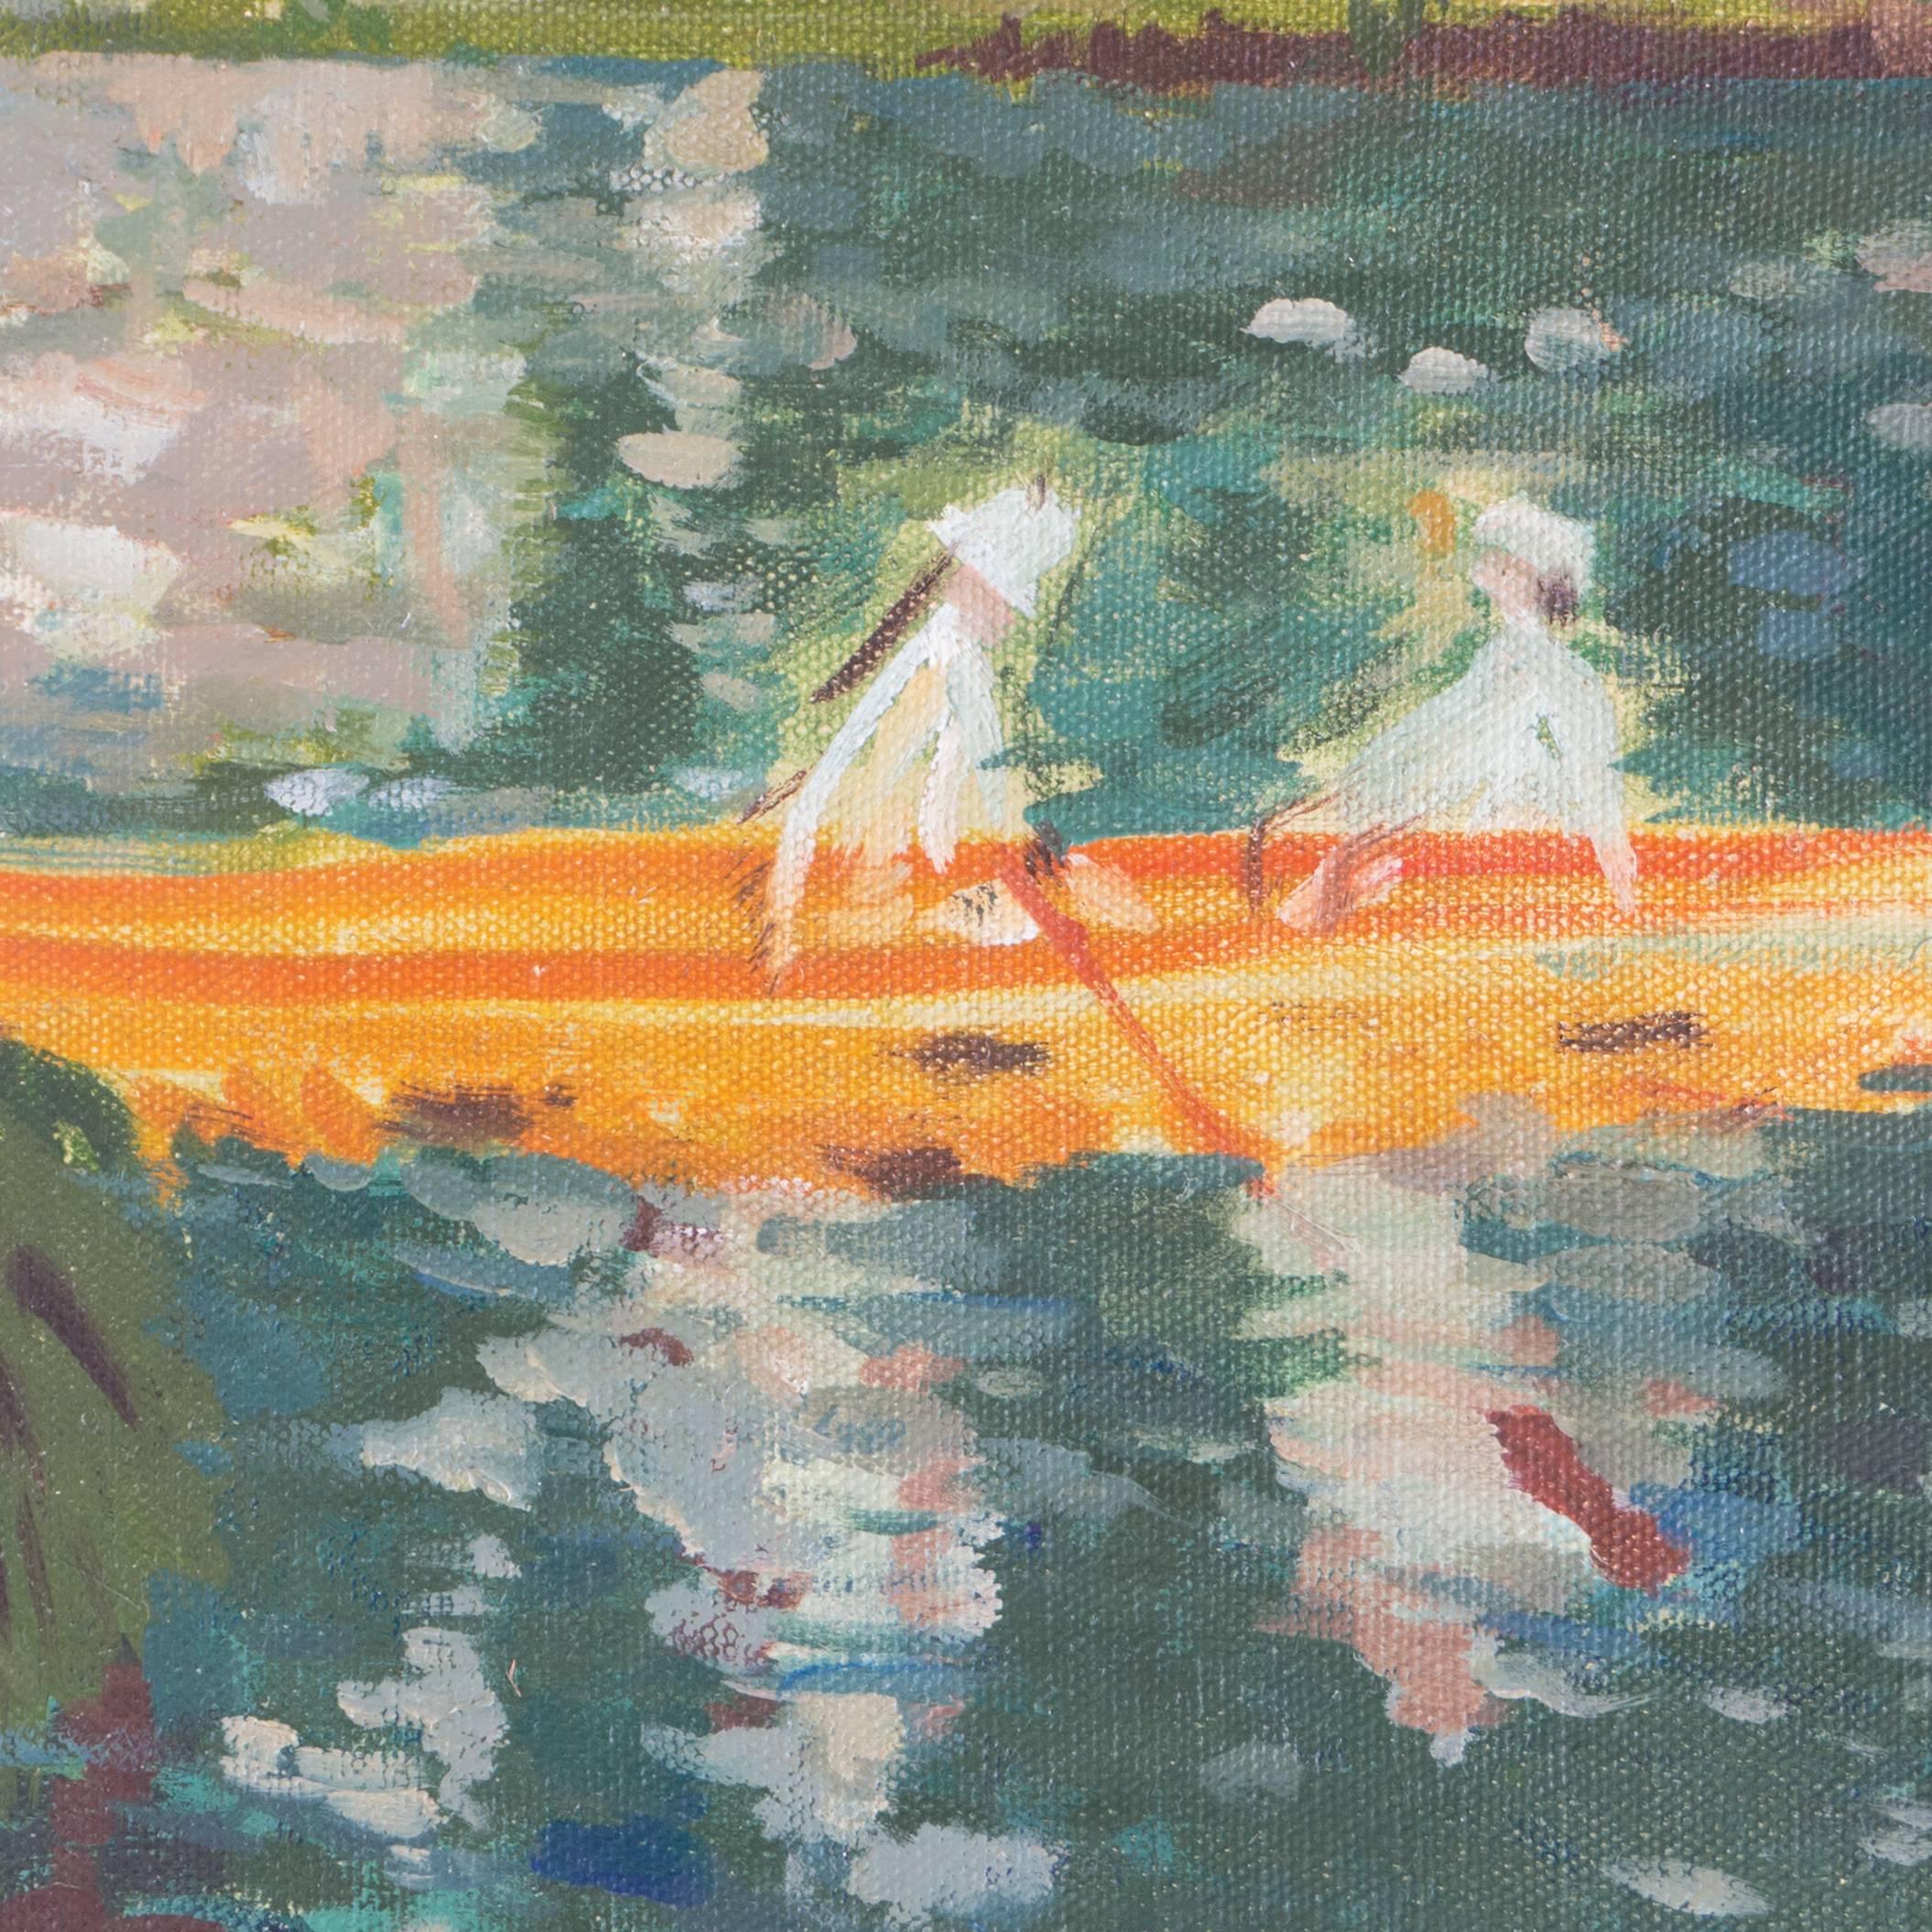 Boating on a Lake - Impressionist Painting by Unknown